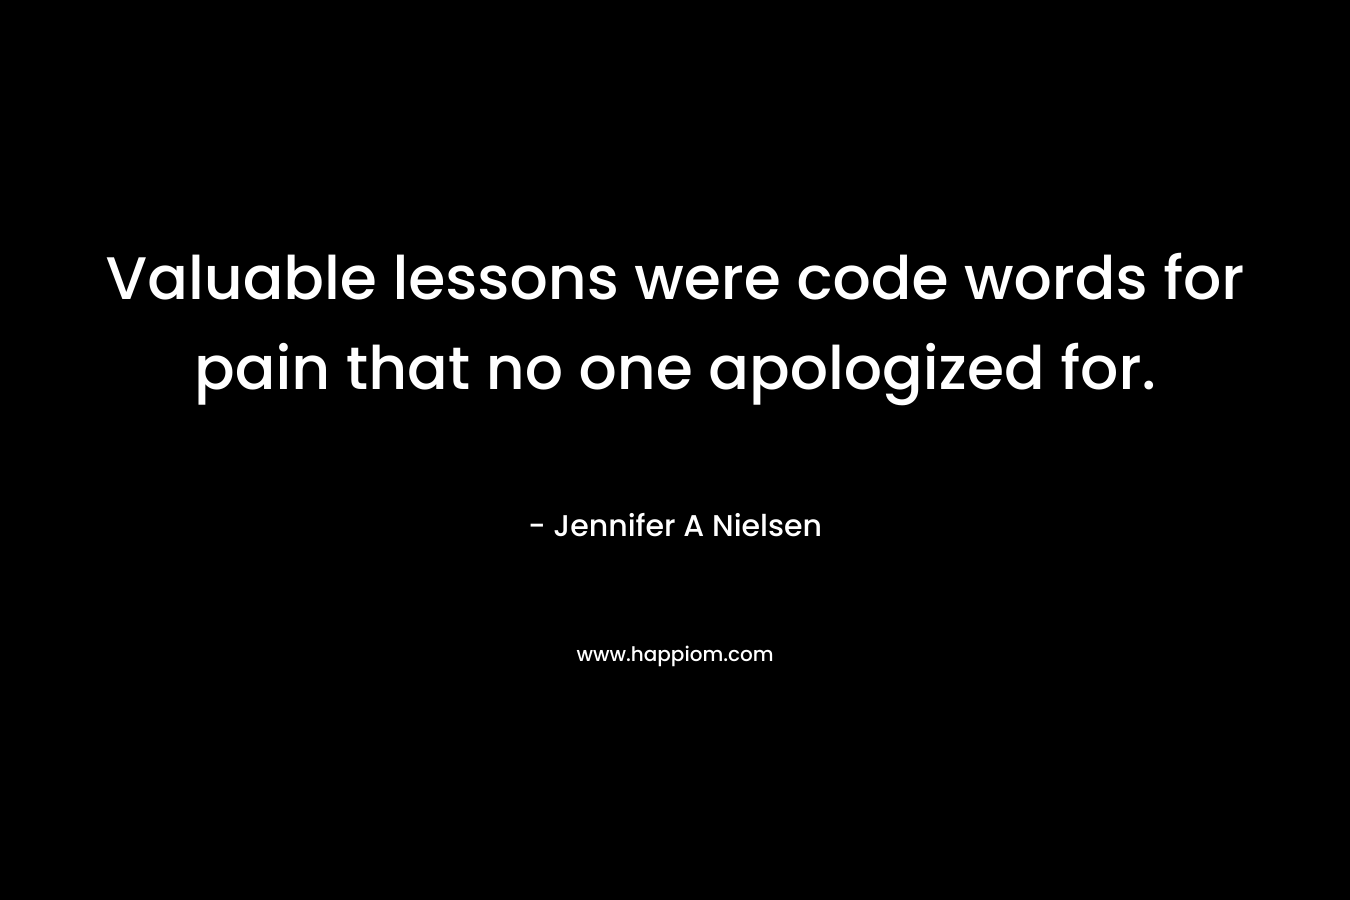 Valuable lessons were code words for pain that no one apologized for. – Jennifer A Nielsen